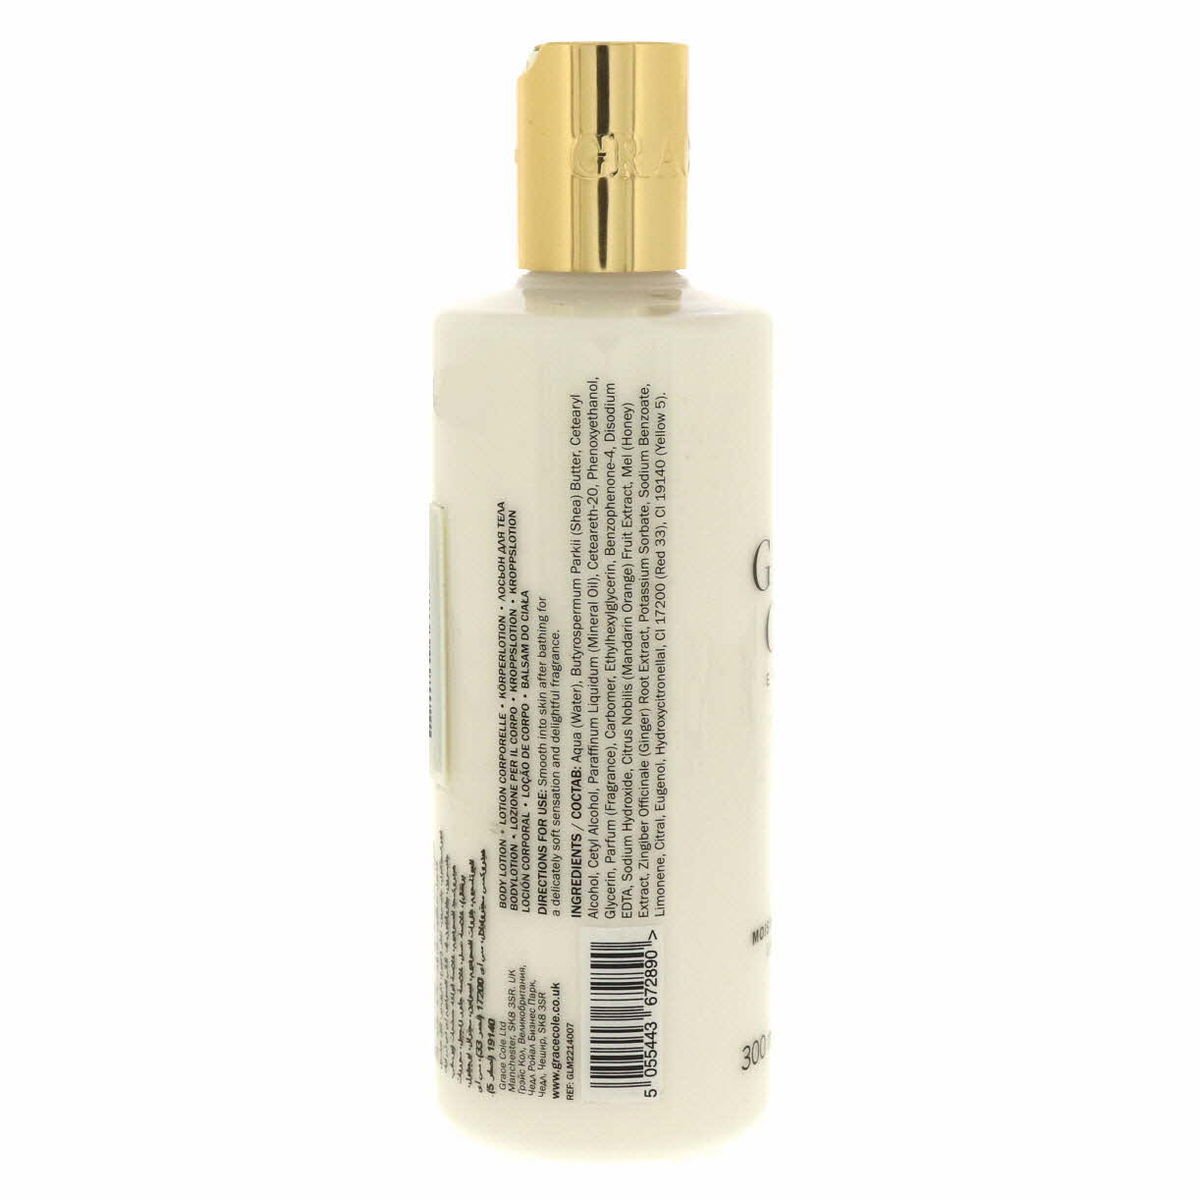 Grace Cole Moisturising Body Lotion Ginger Lily And Mandarian 300ml